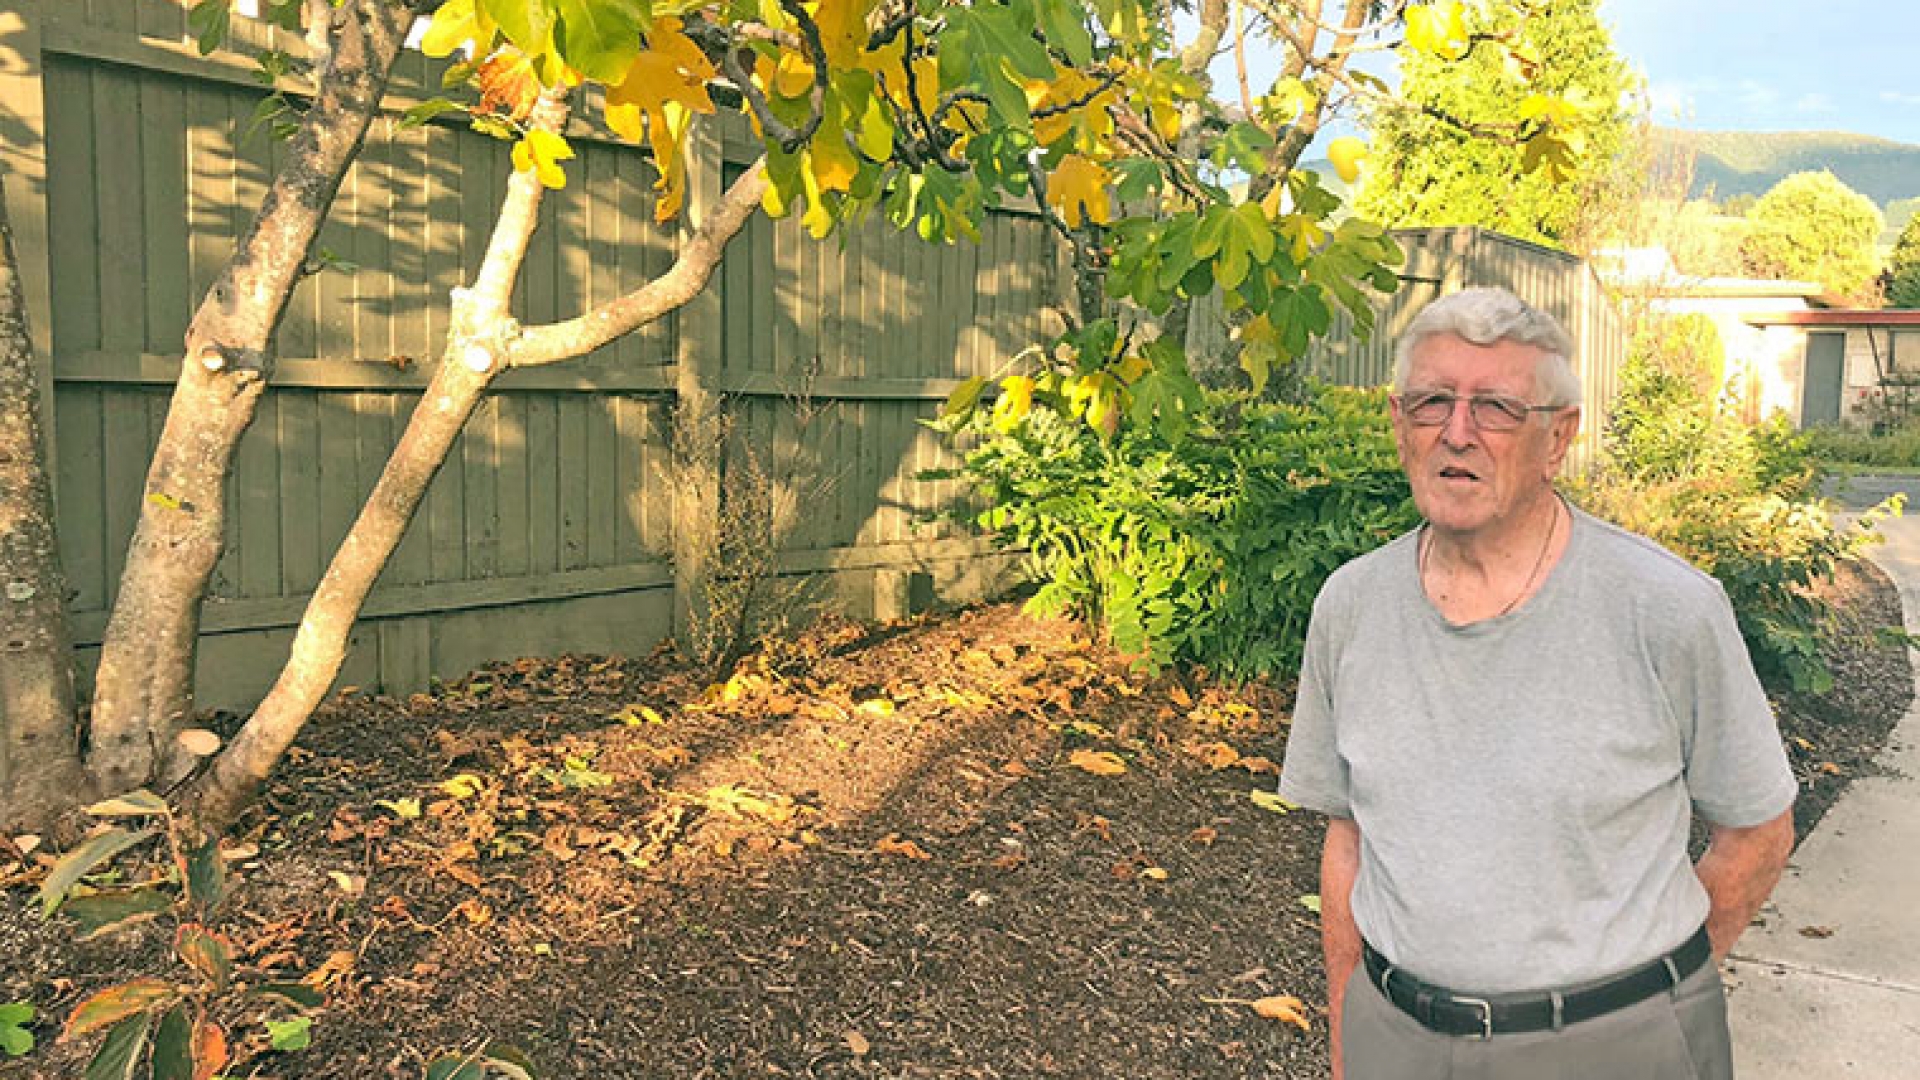 Stoke resident Brian Radford has been enjoying access to the fruit trees